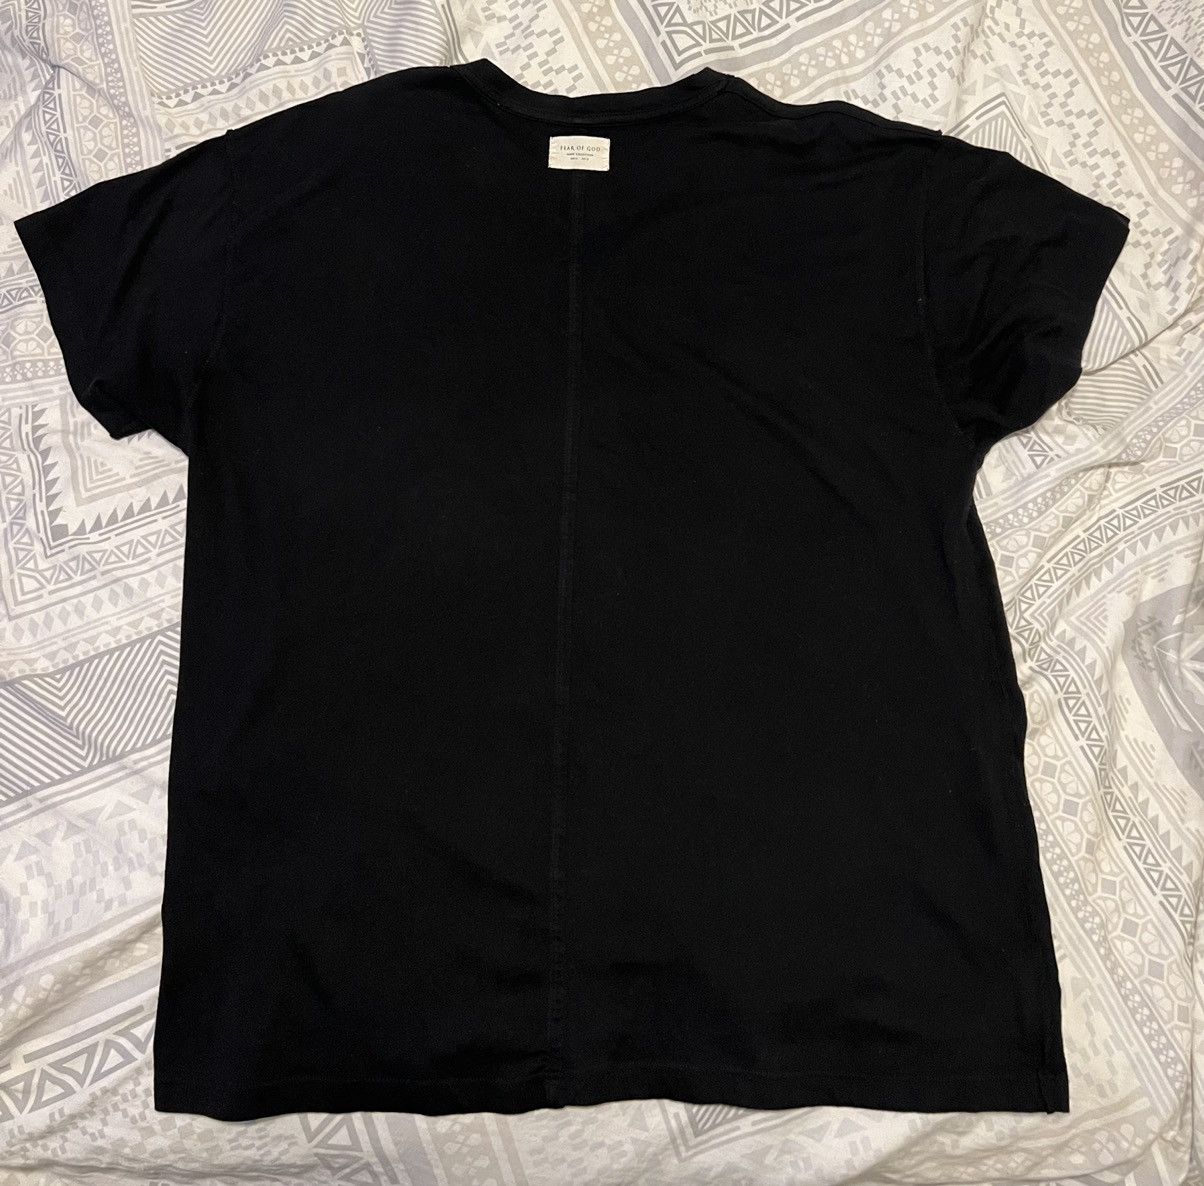 Fear Of God Inside Out Tee | Grailed